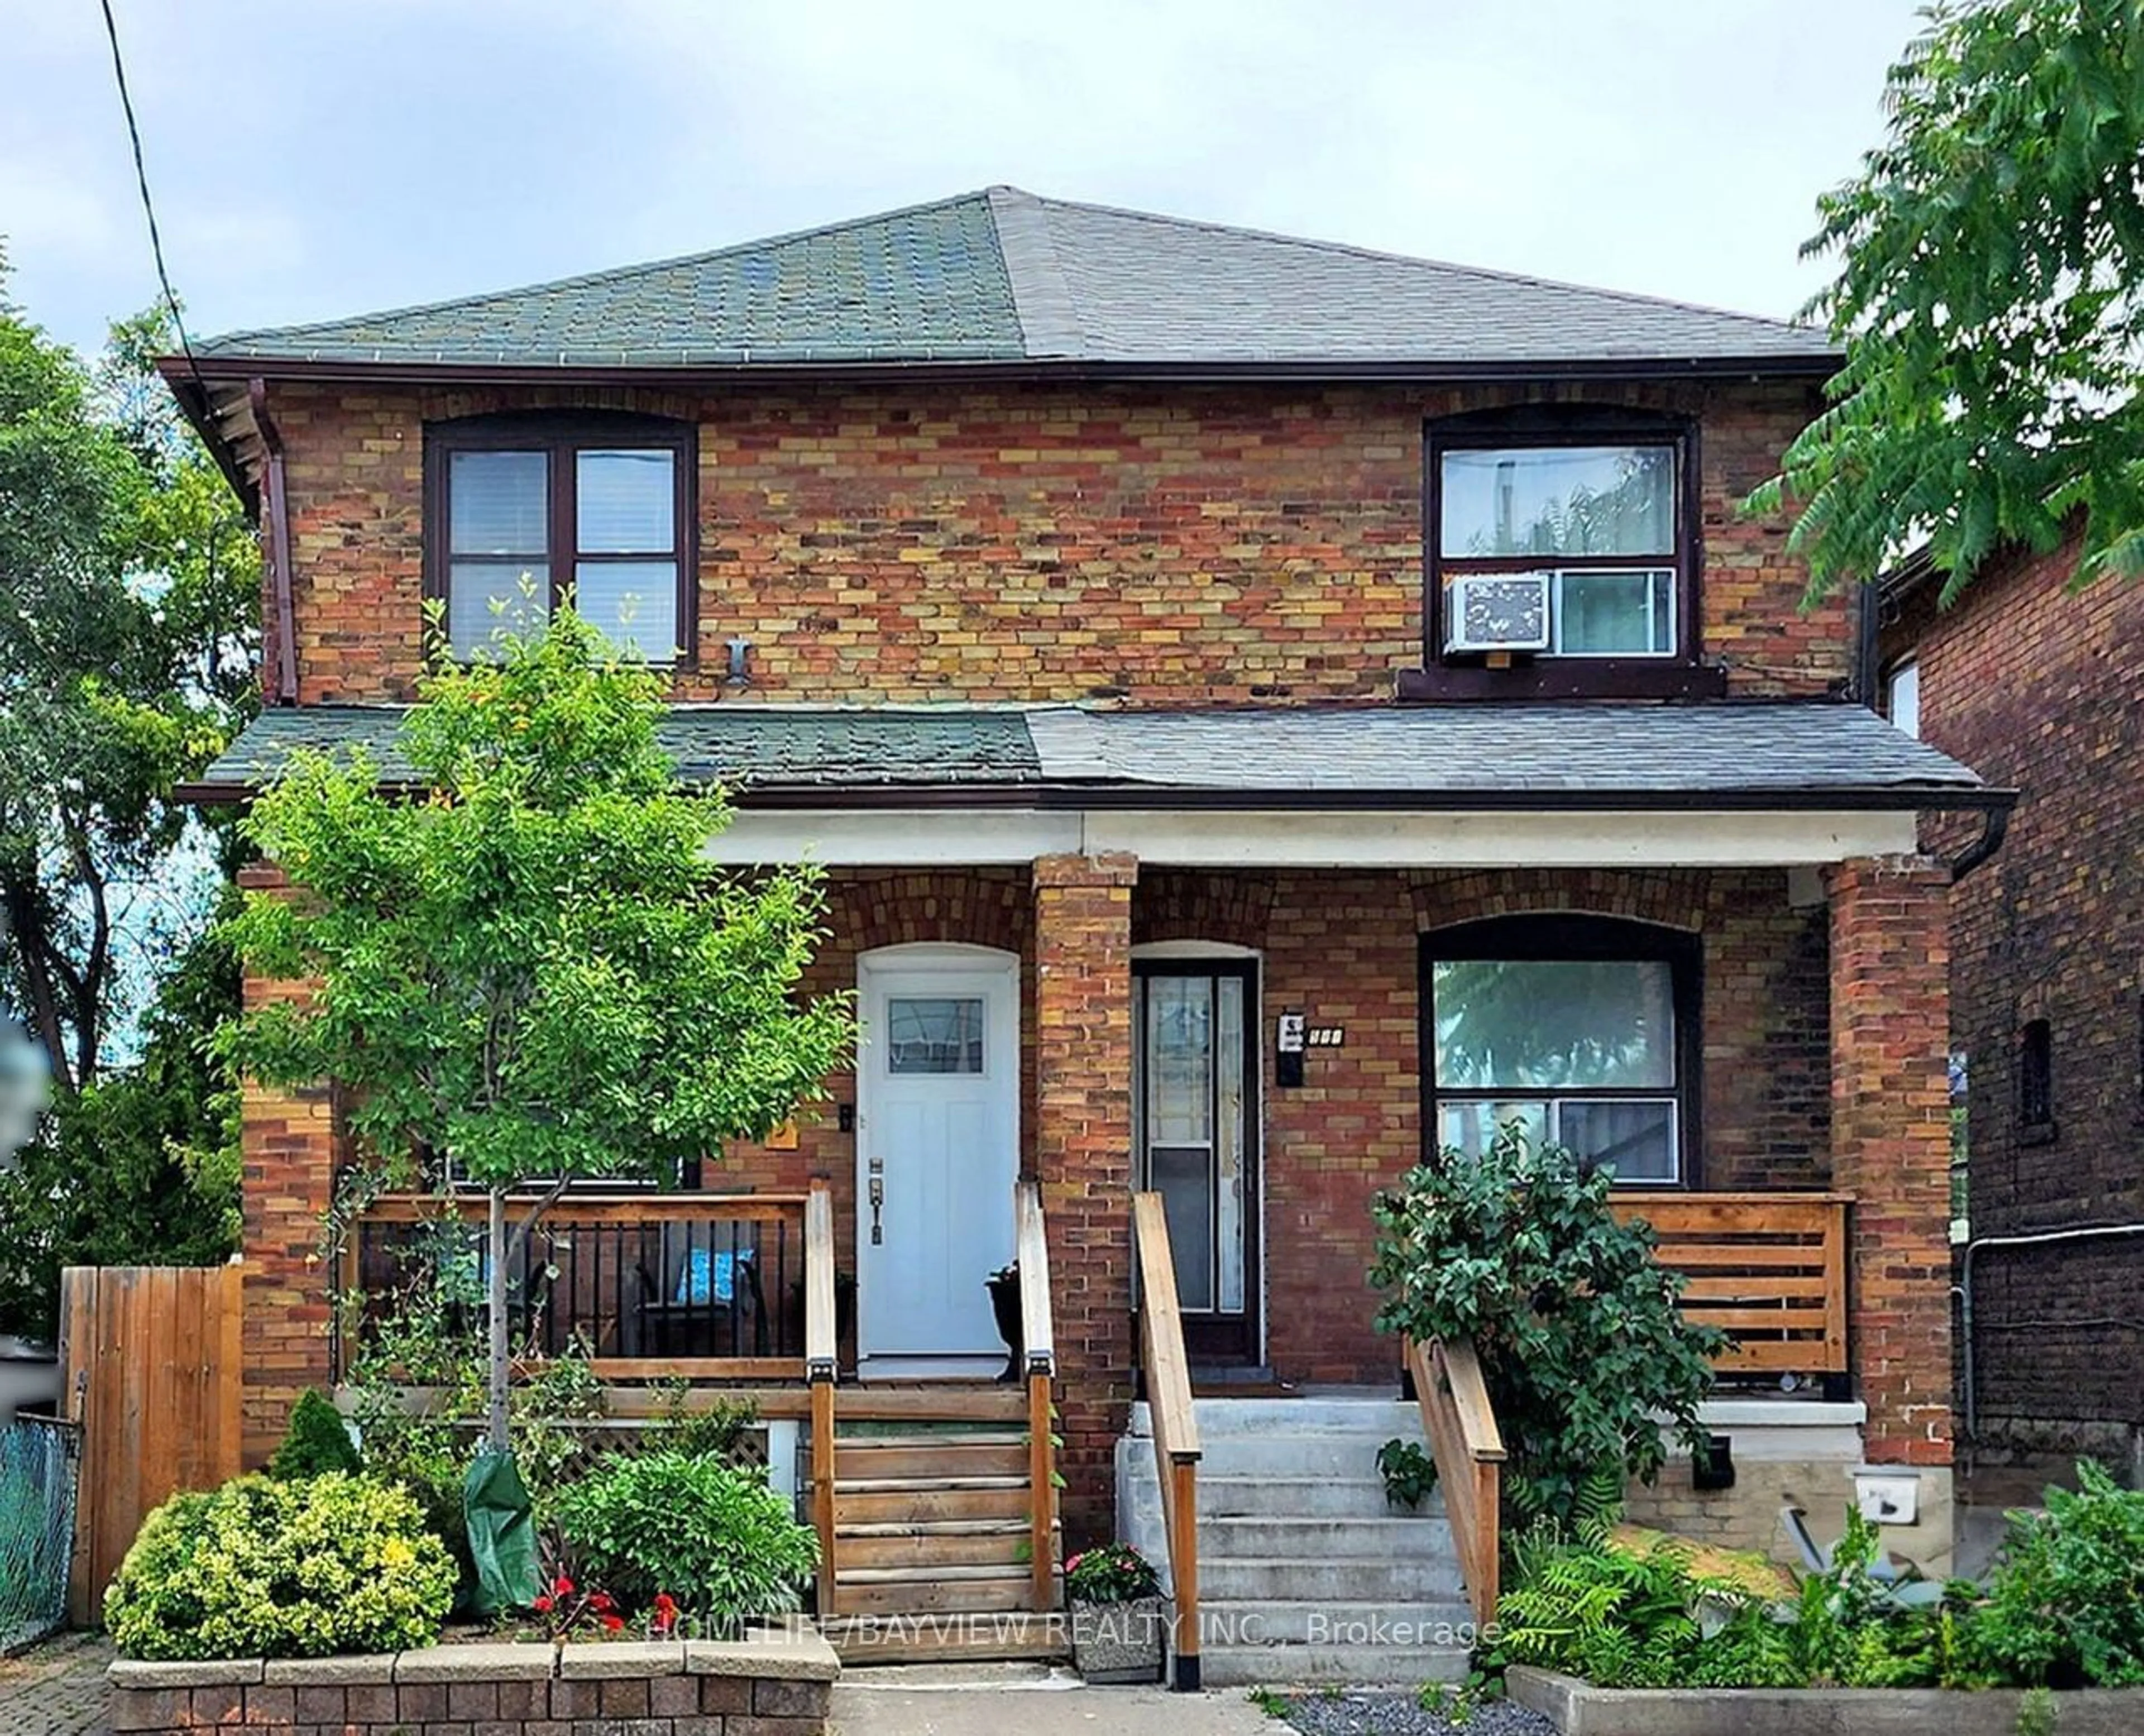 Home with brick exterior material for 593 Vaughan Rd, Toronto Ontario M6C 2R4